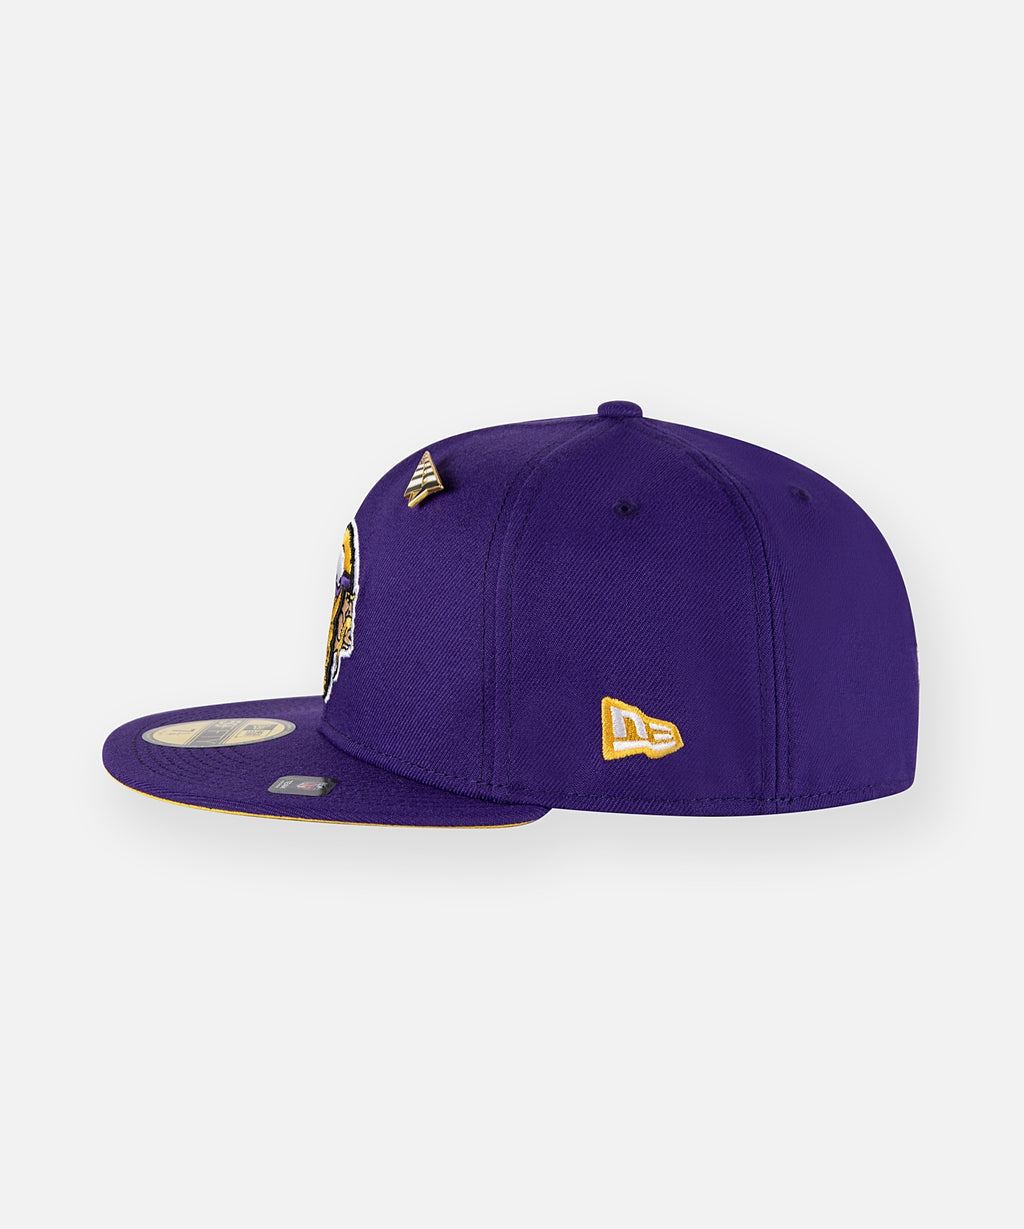 Paper Planes x Minnesota Vikings Team Color 59Fifty Fitted Hat_For Men_4